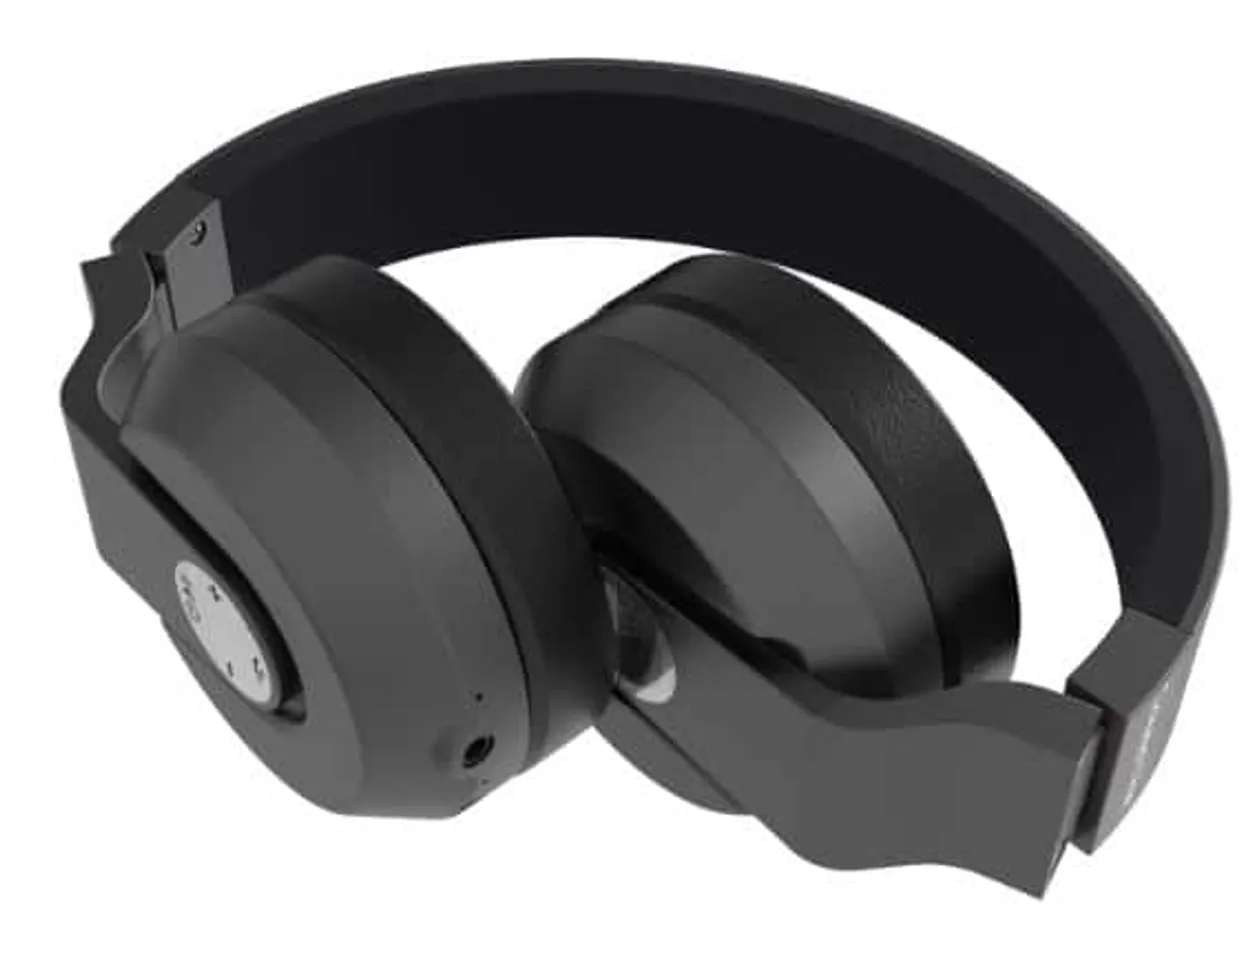 Sound One launches V Bluetooth Wireless headphones